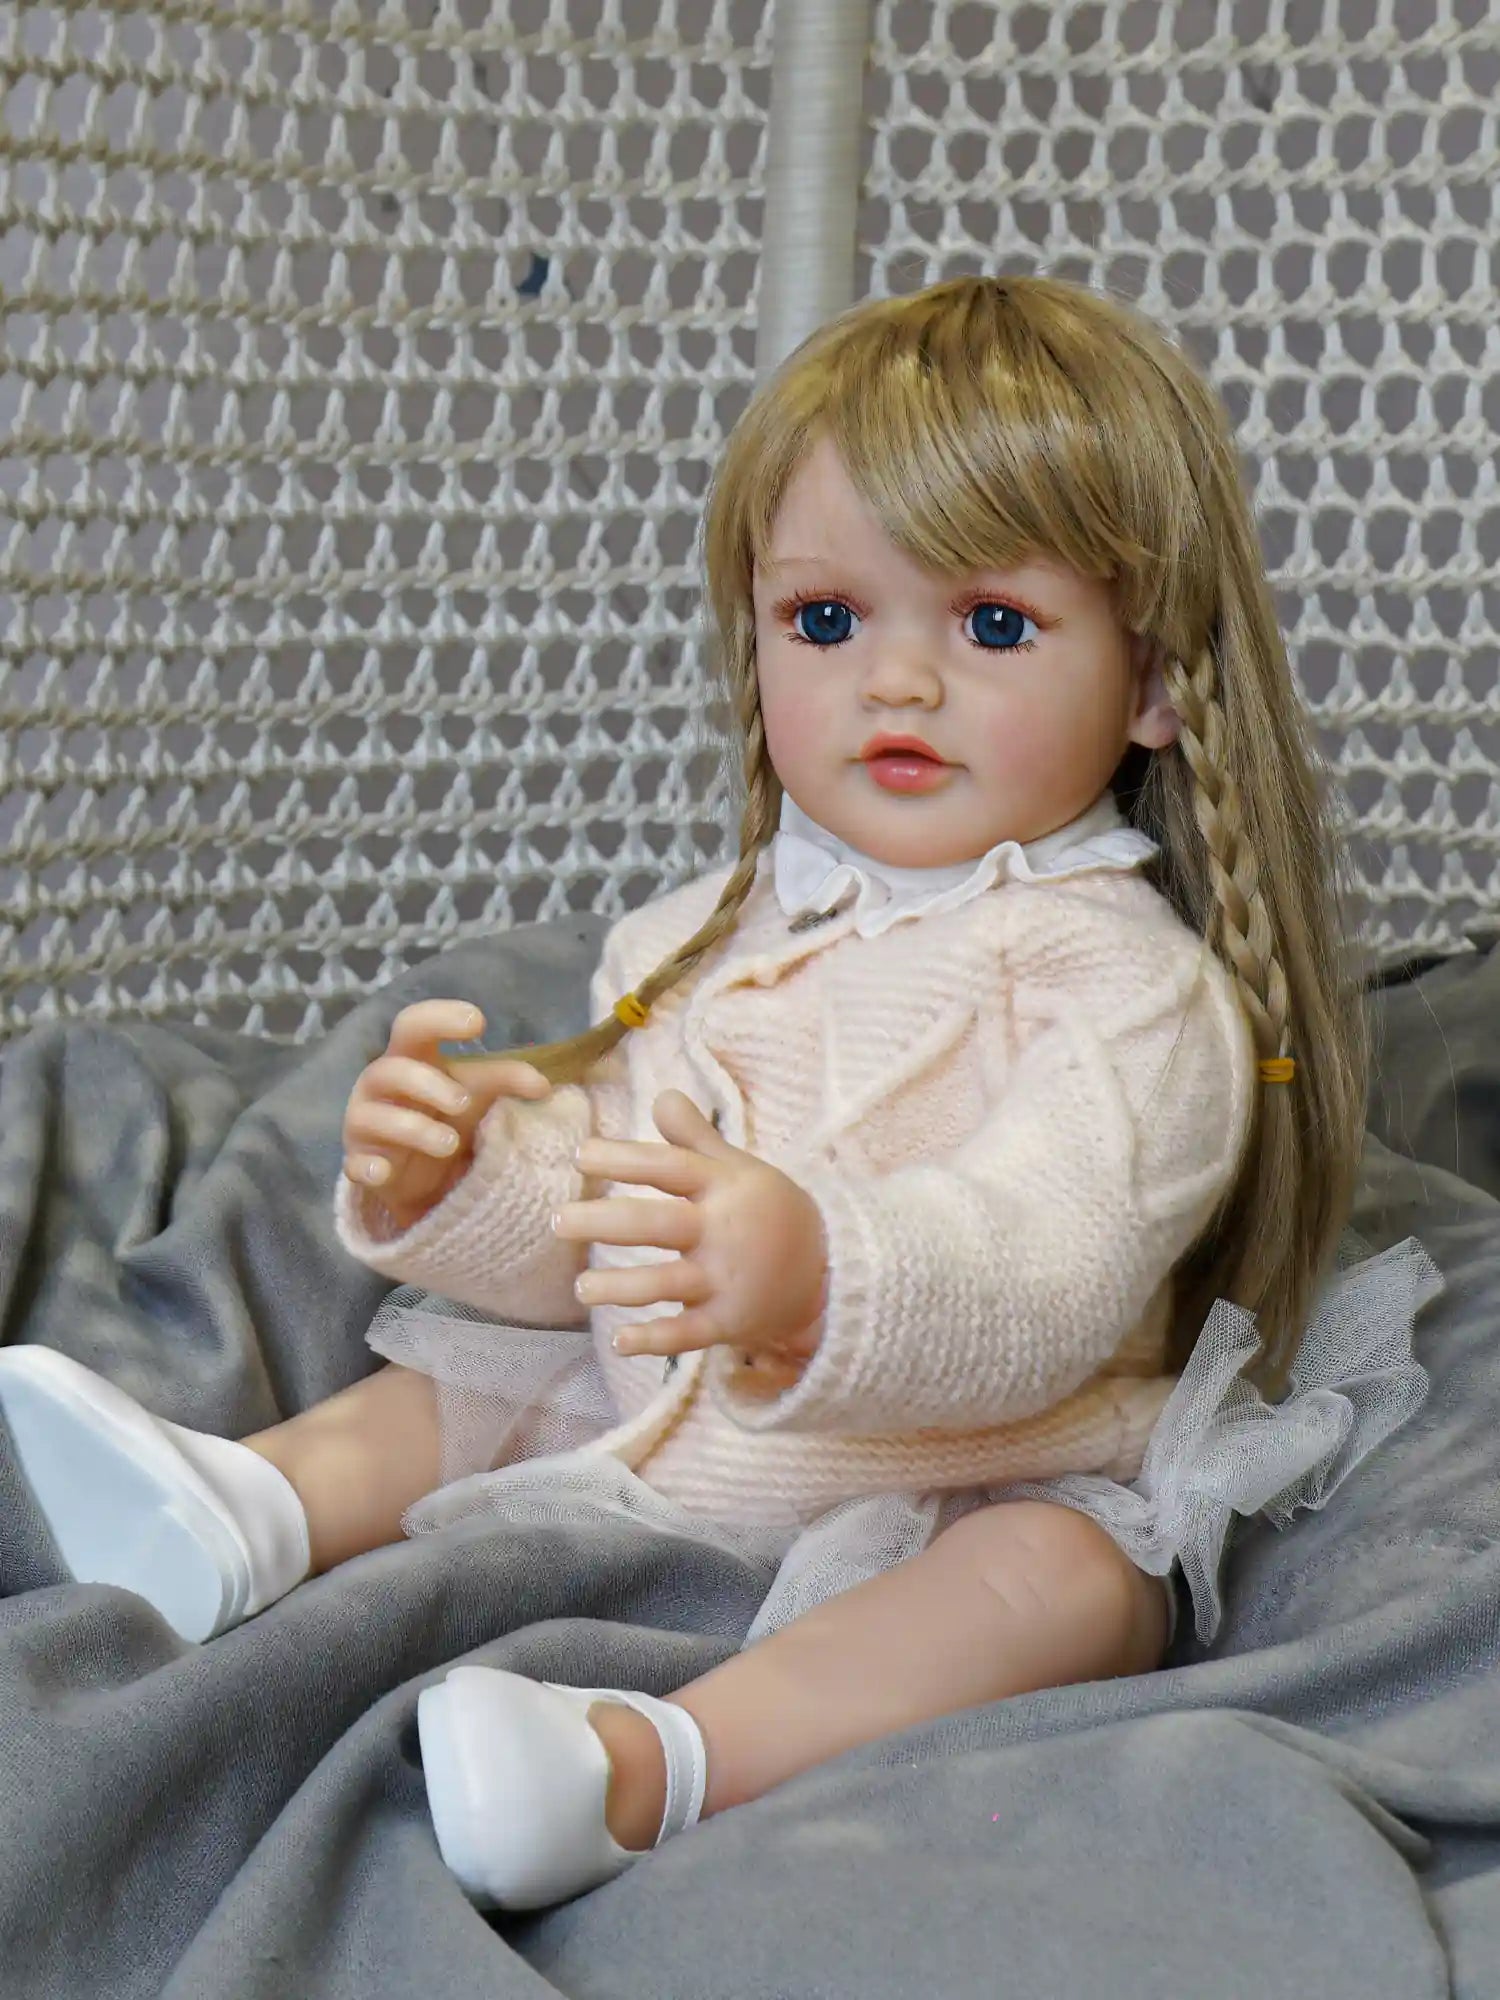 Adorable reborn baby dolls for sale, featuring realistic blue eyes